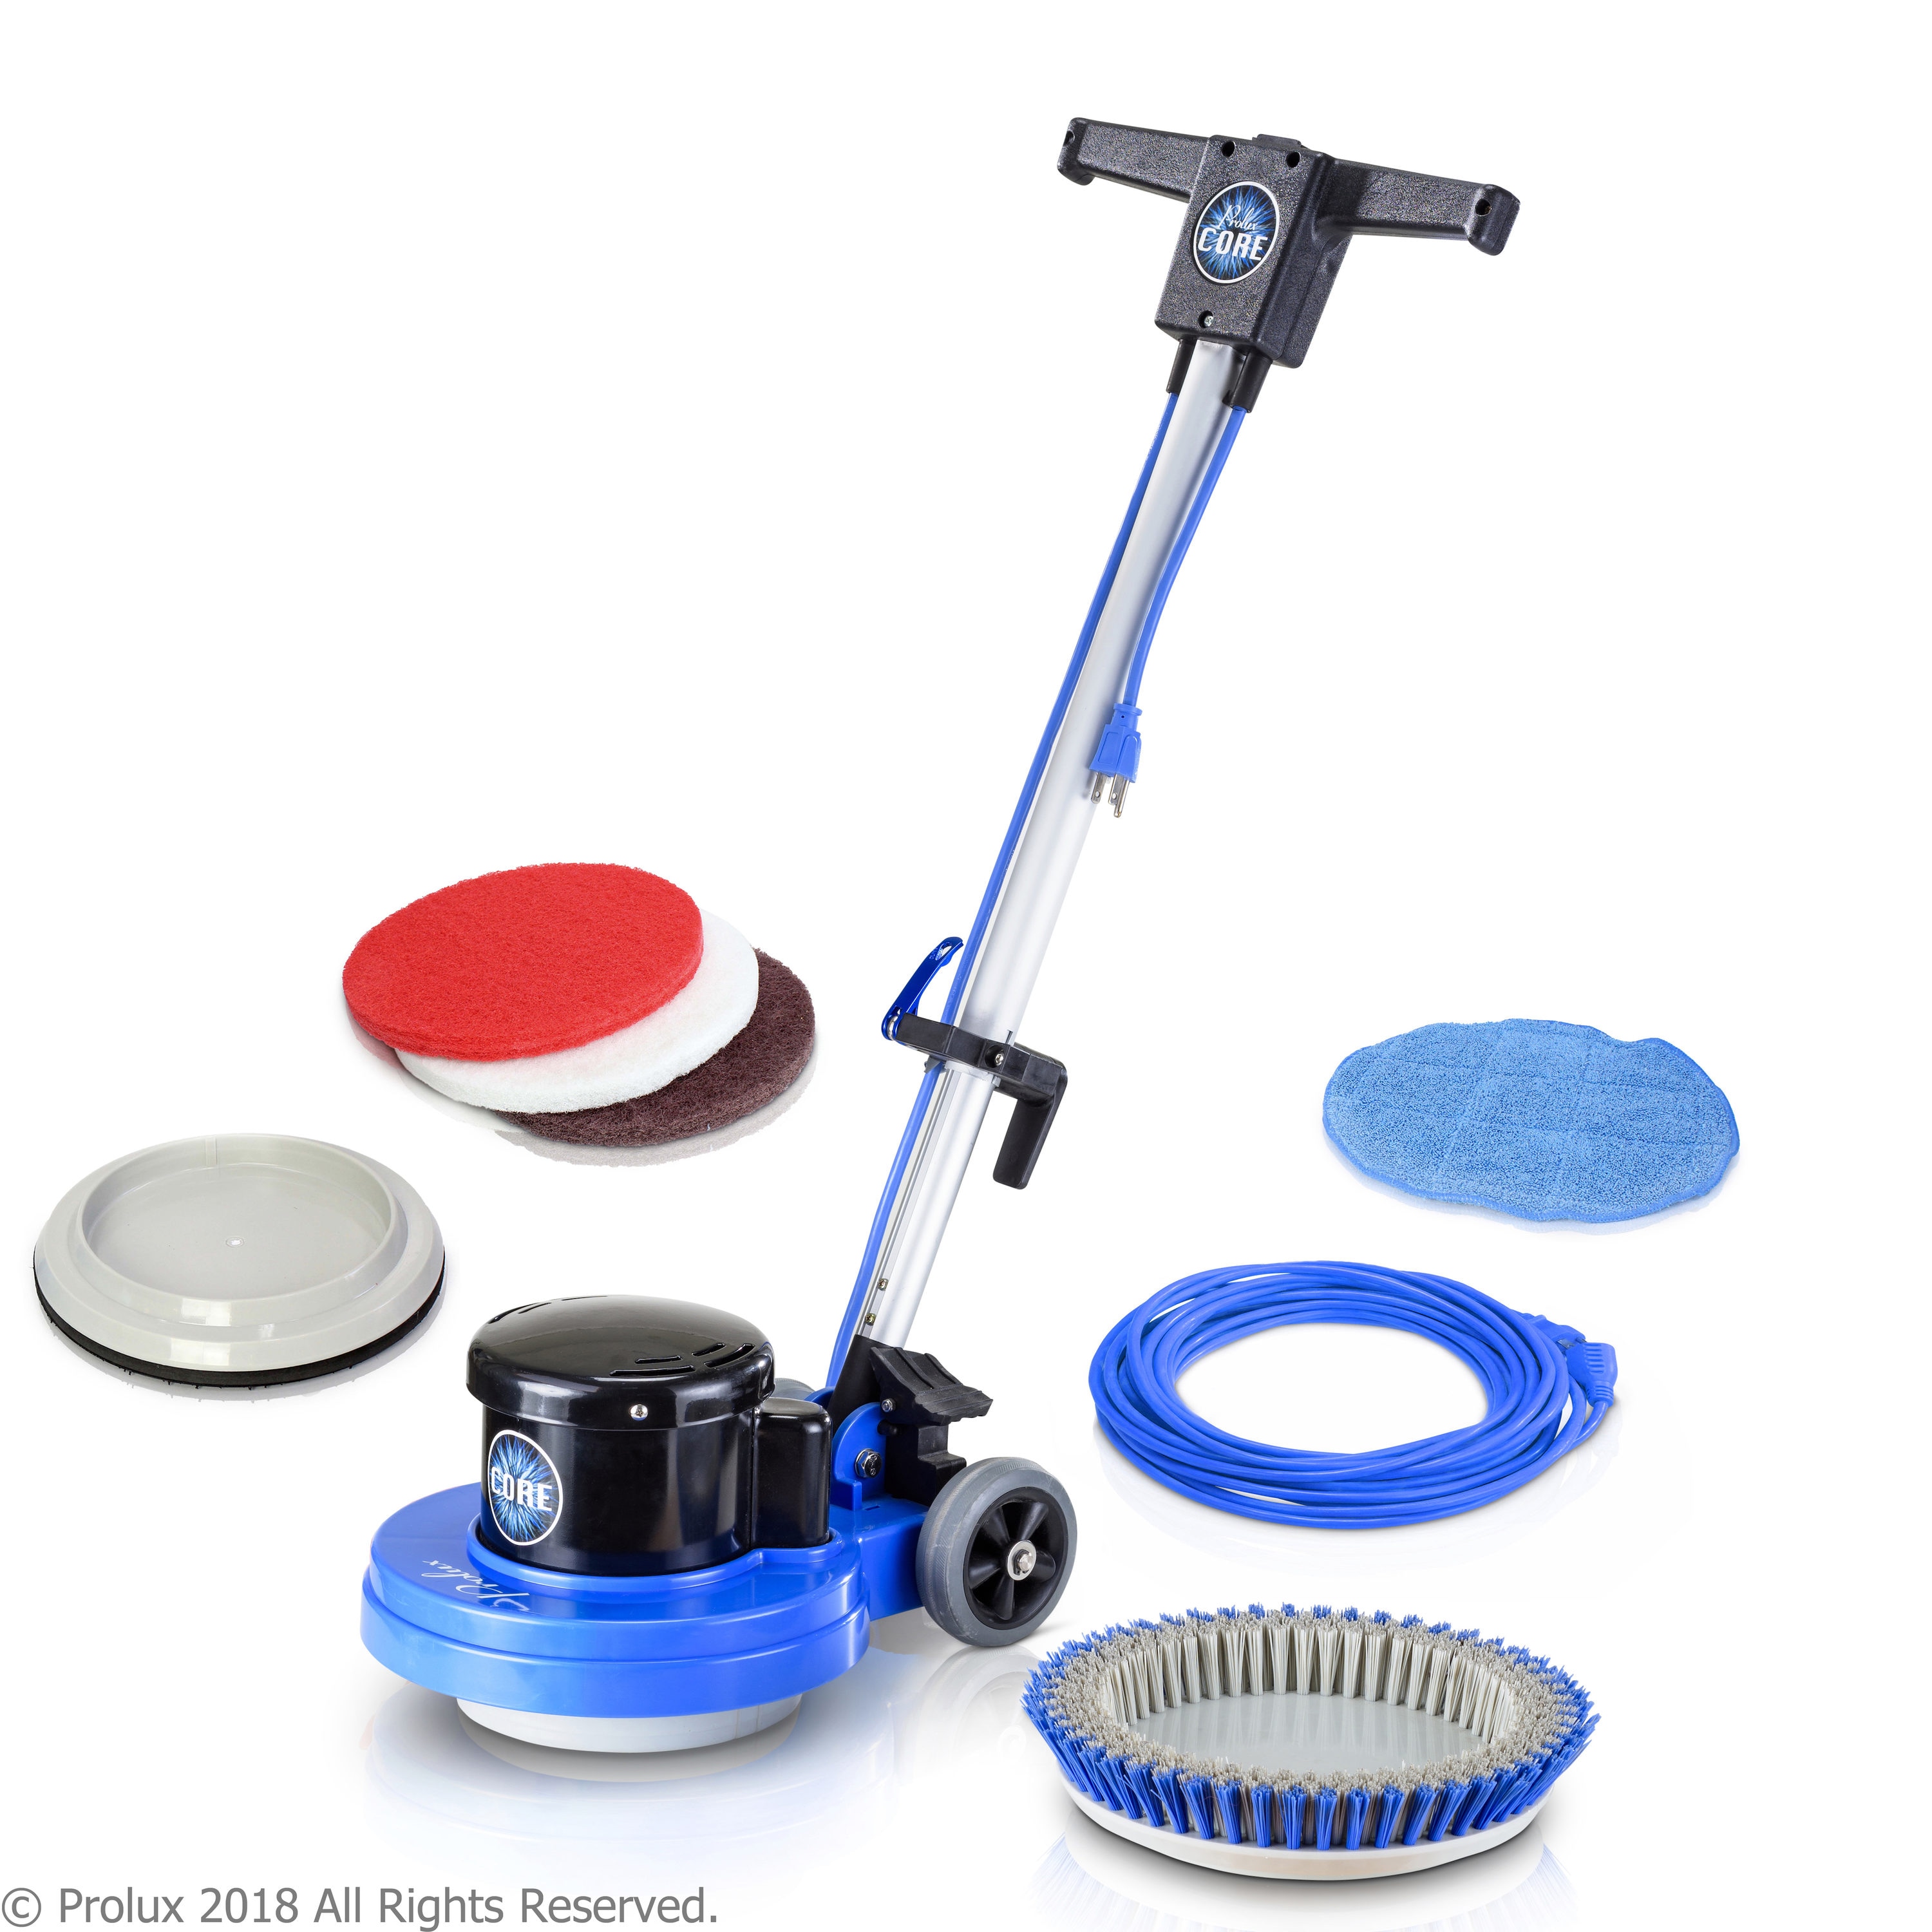 Rough Surface Wet Mops for Abrasive Floors - Parish Supply